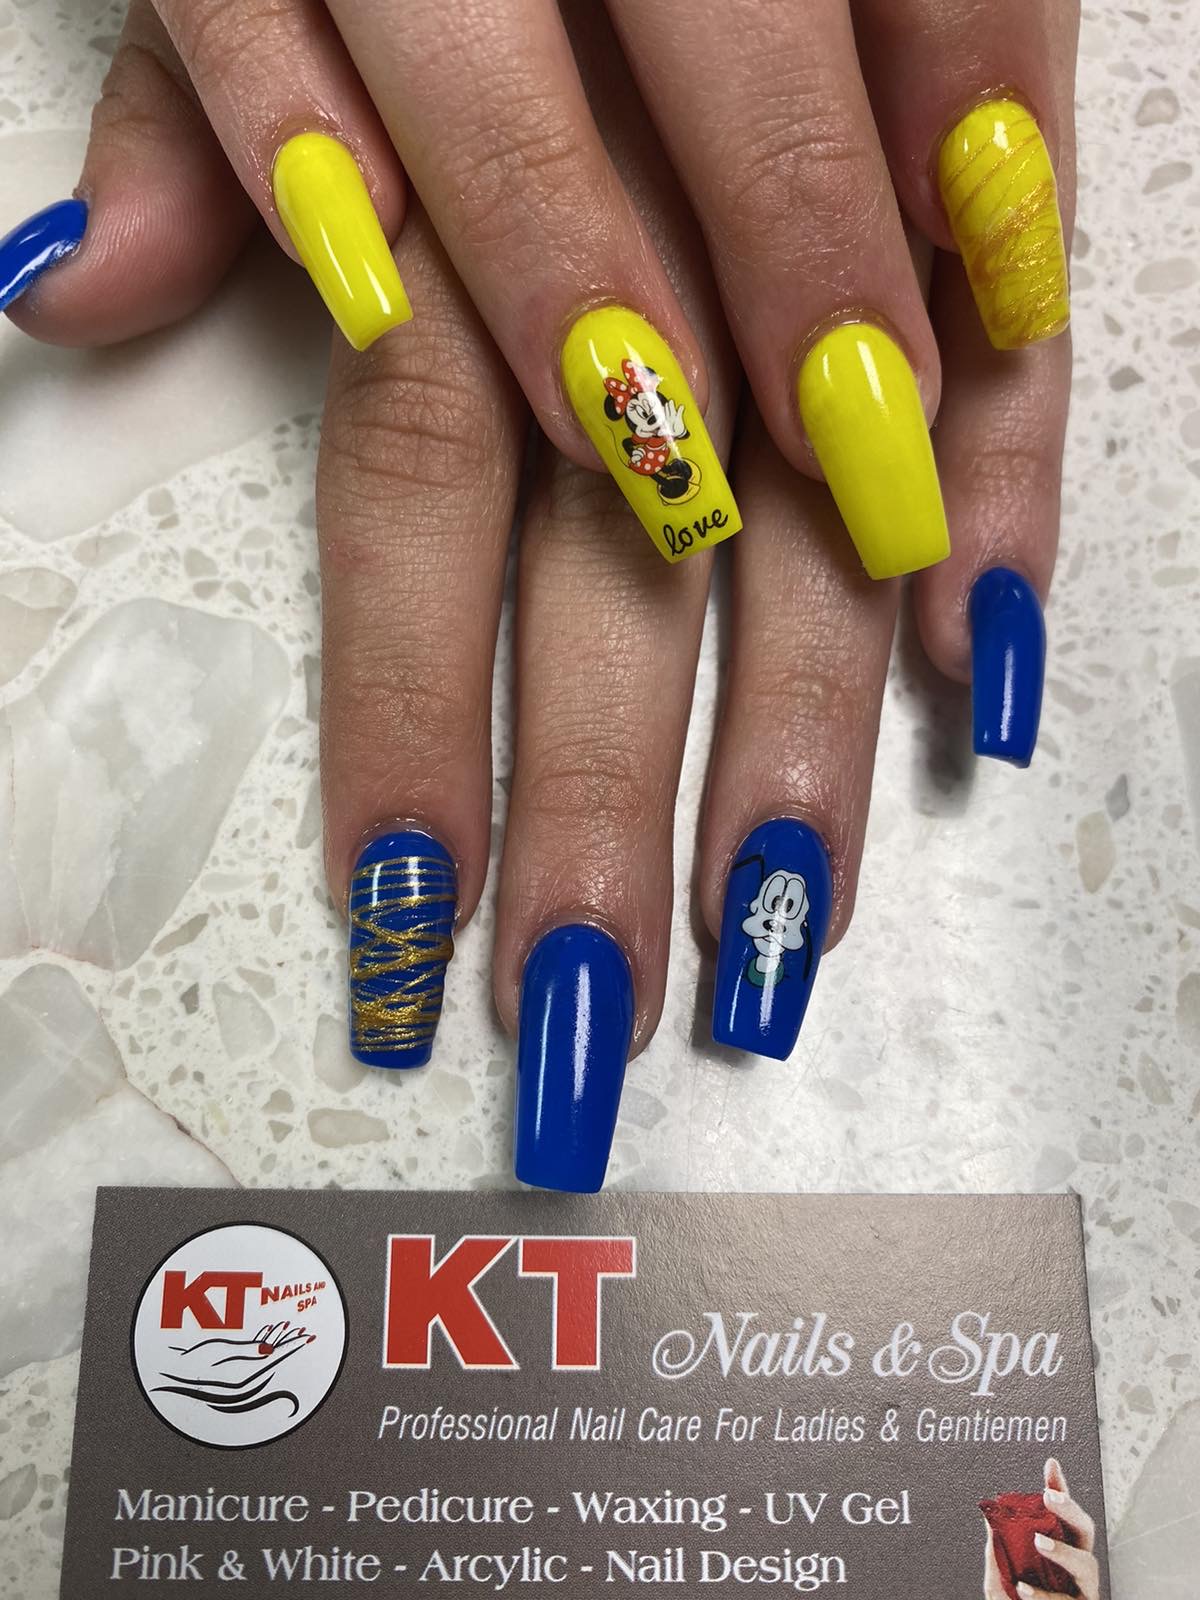 KT nails and spa 815 Lamar St suite A, Sweetwater Texas 79556